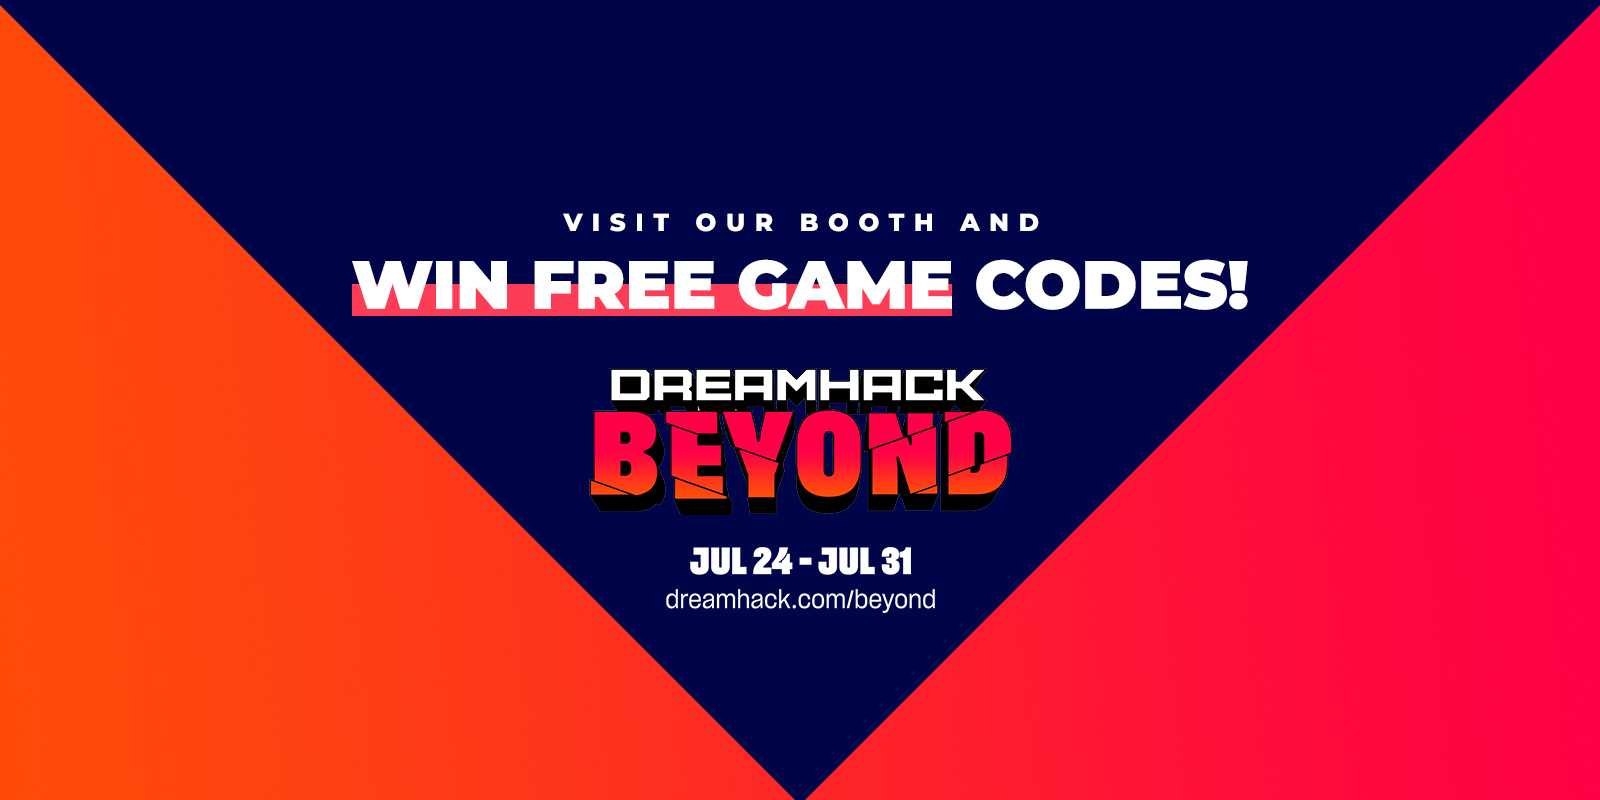 All in! Games DreamHack Beyond Contest